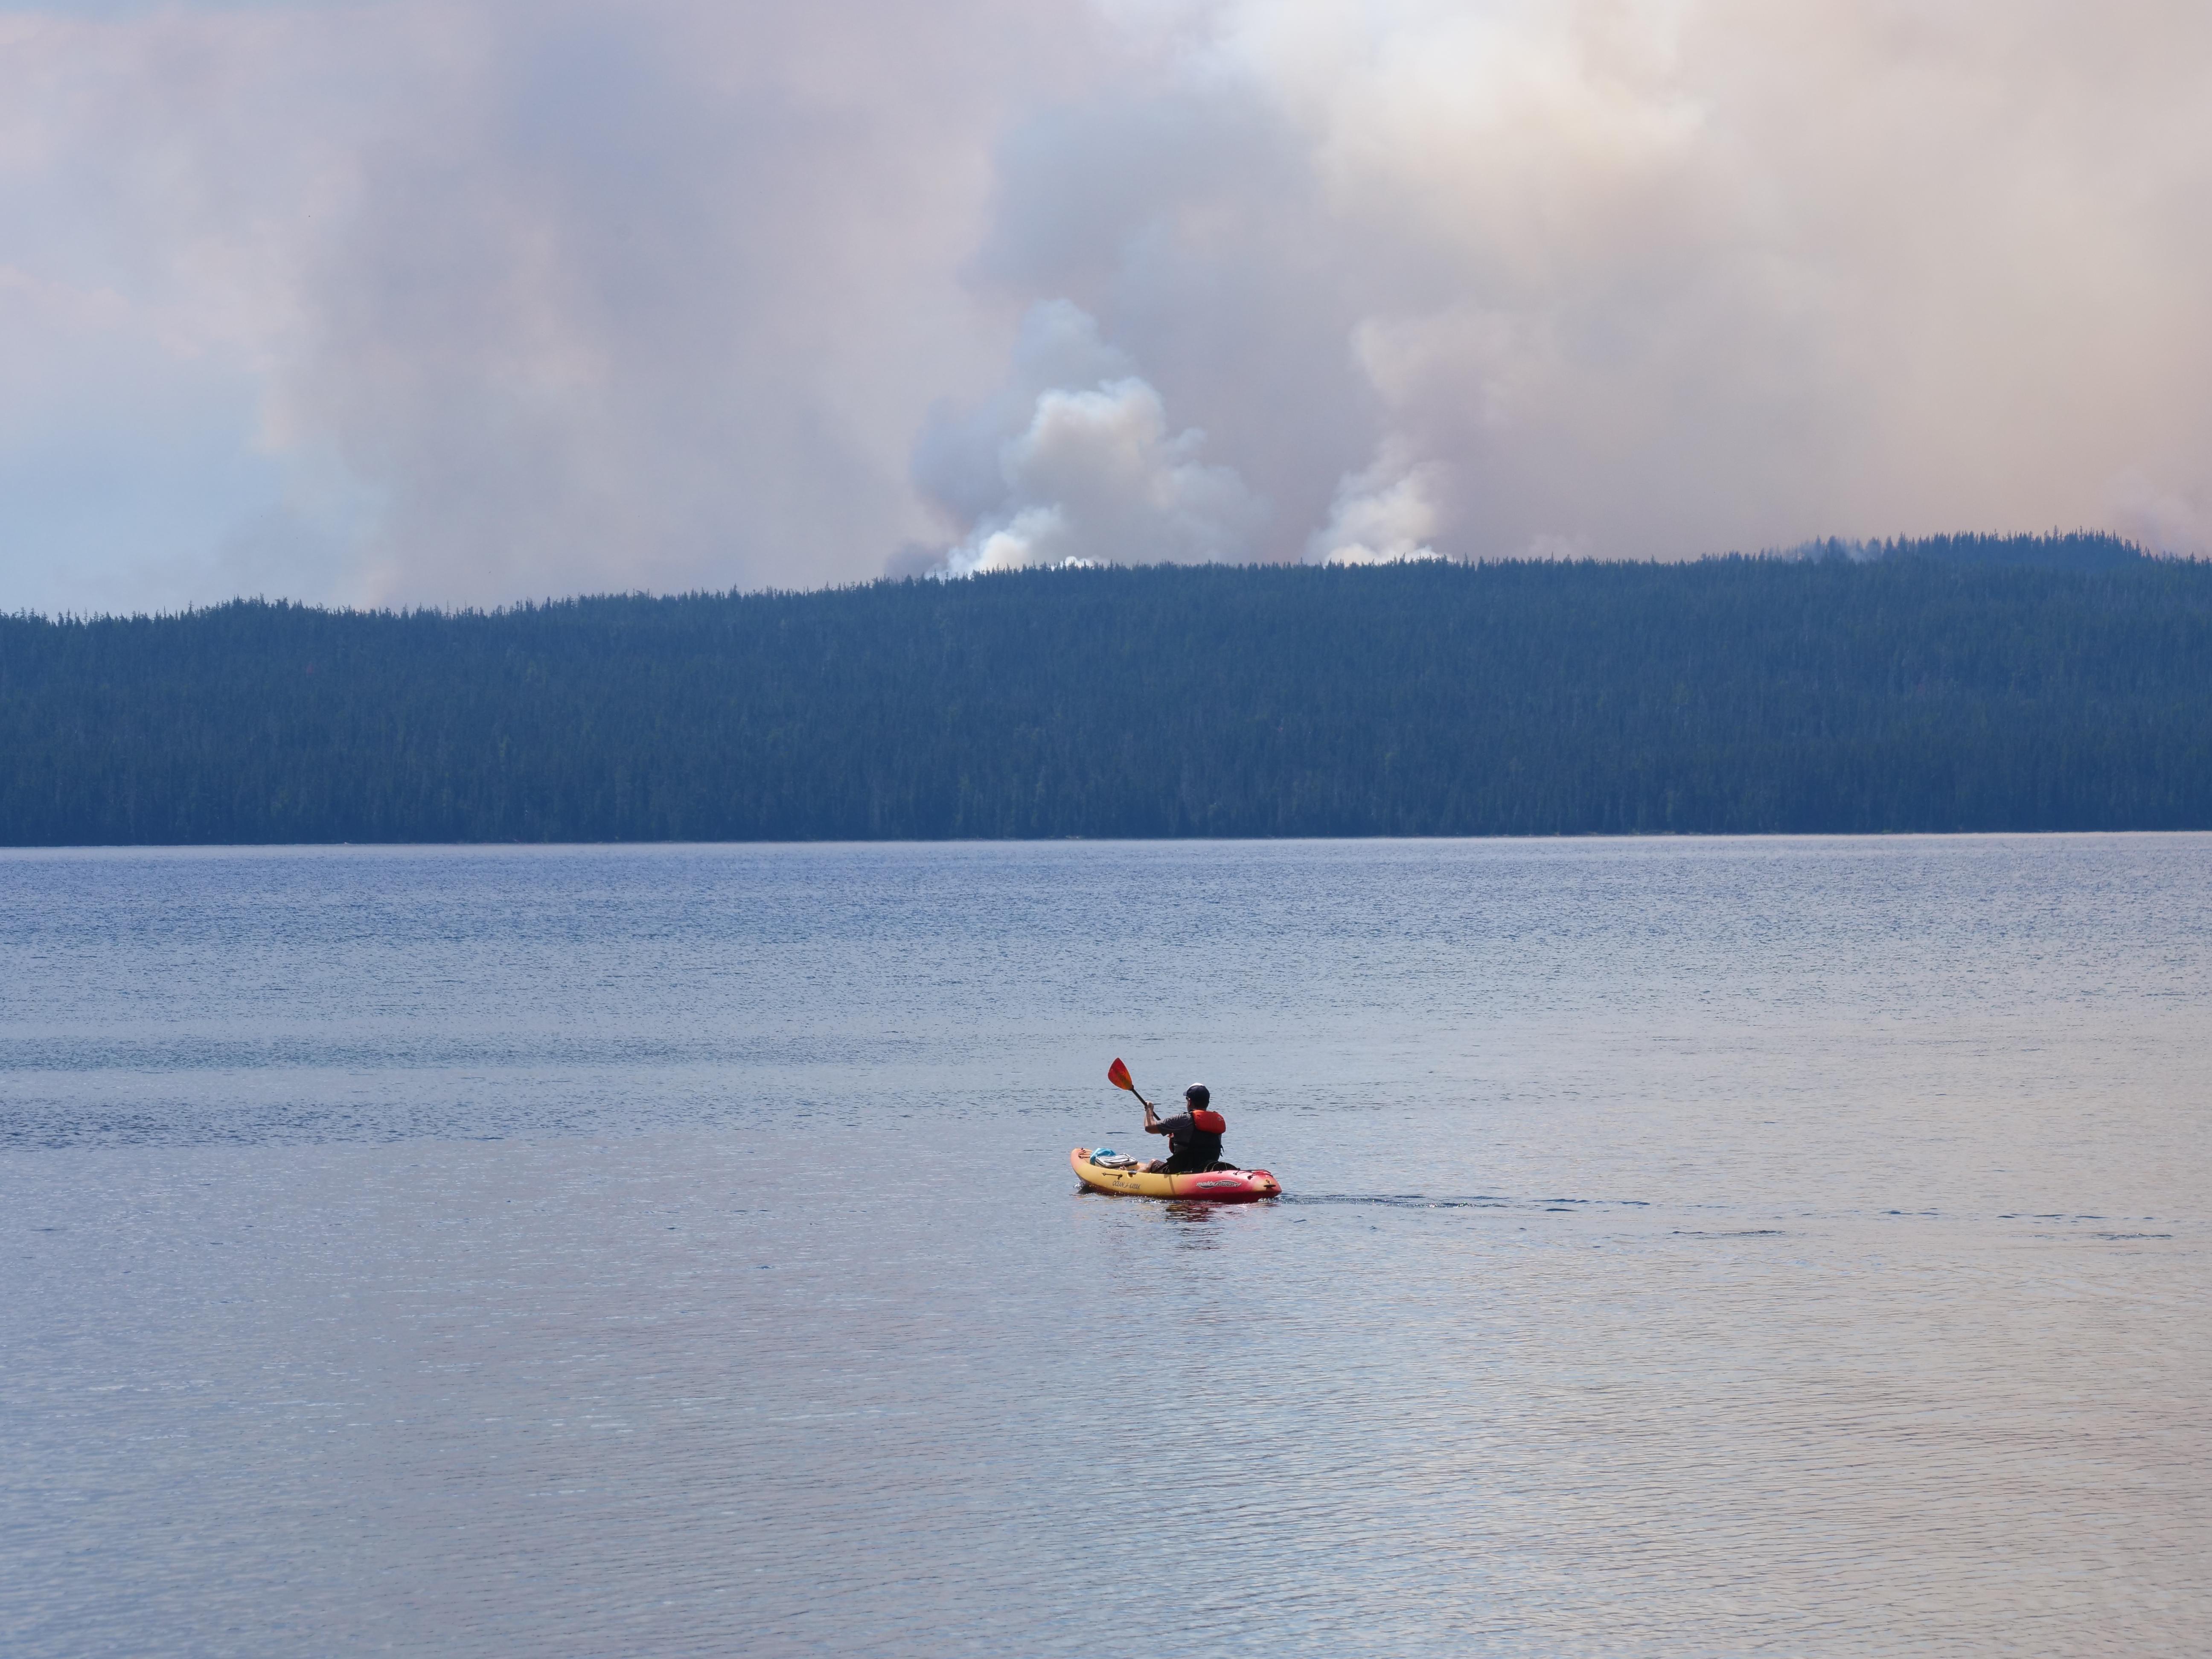 Kayaker shown on Waldo Lake with prominent smoke column in the background.